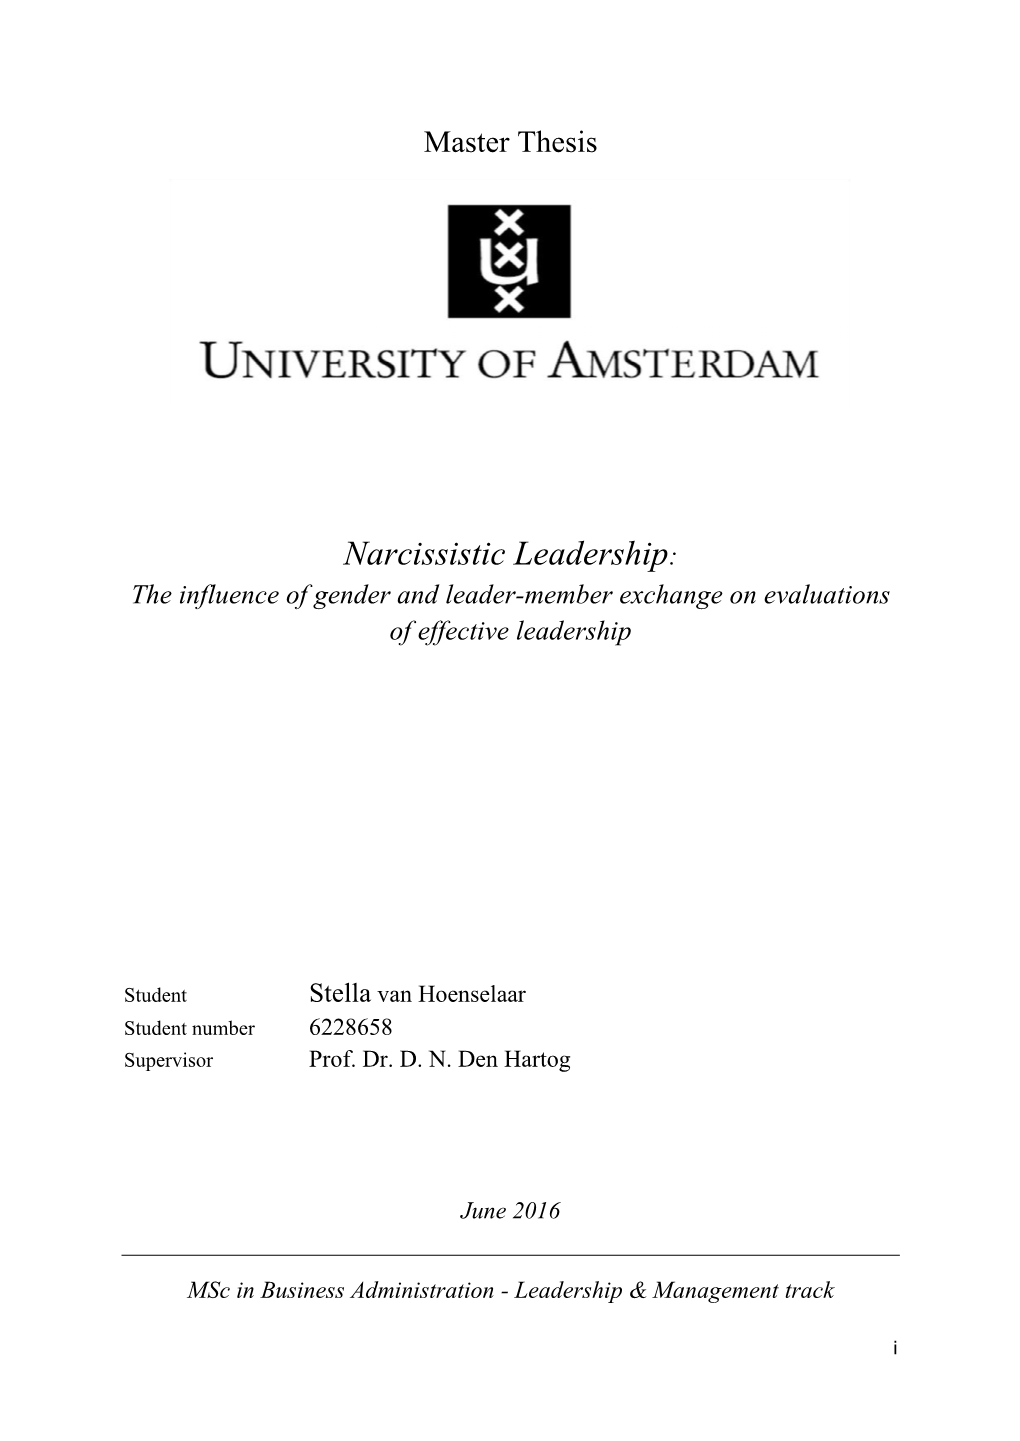 Narcissistic Leadership: the Influence of Gender and Leader-Member Exchange on Evaluations of Effective Leadership